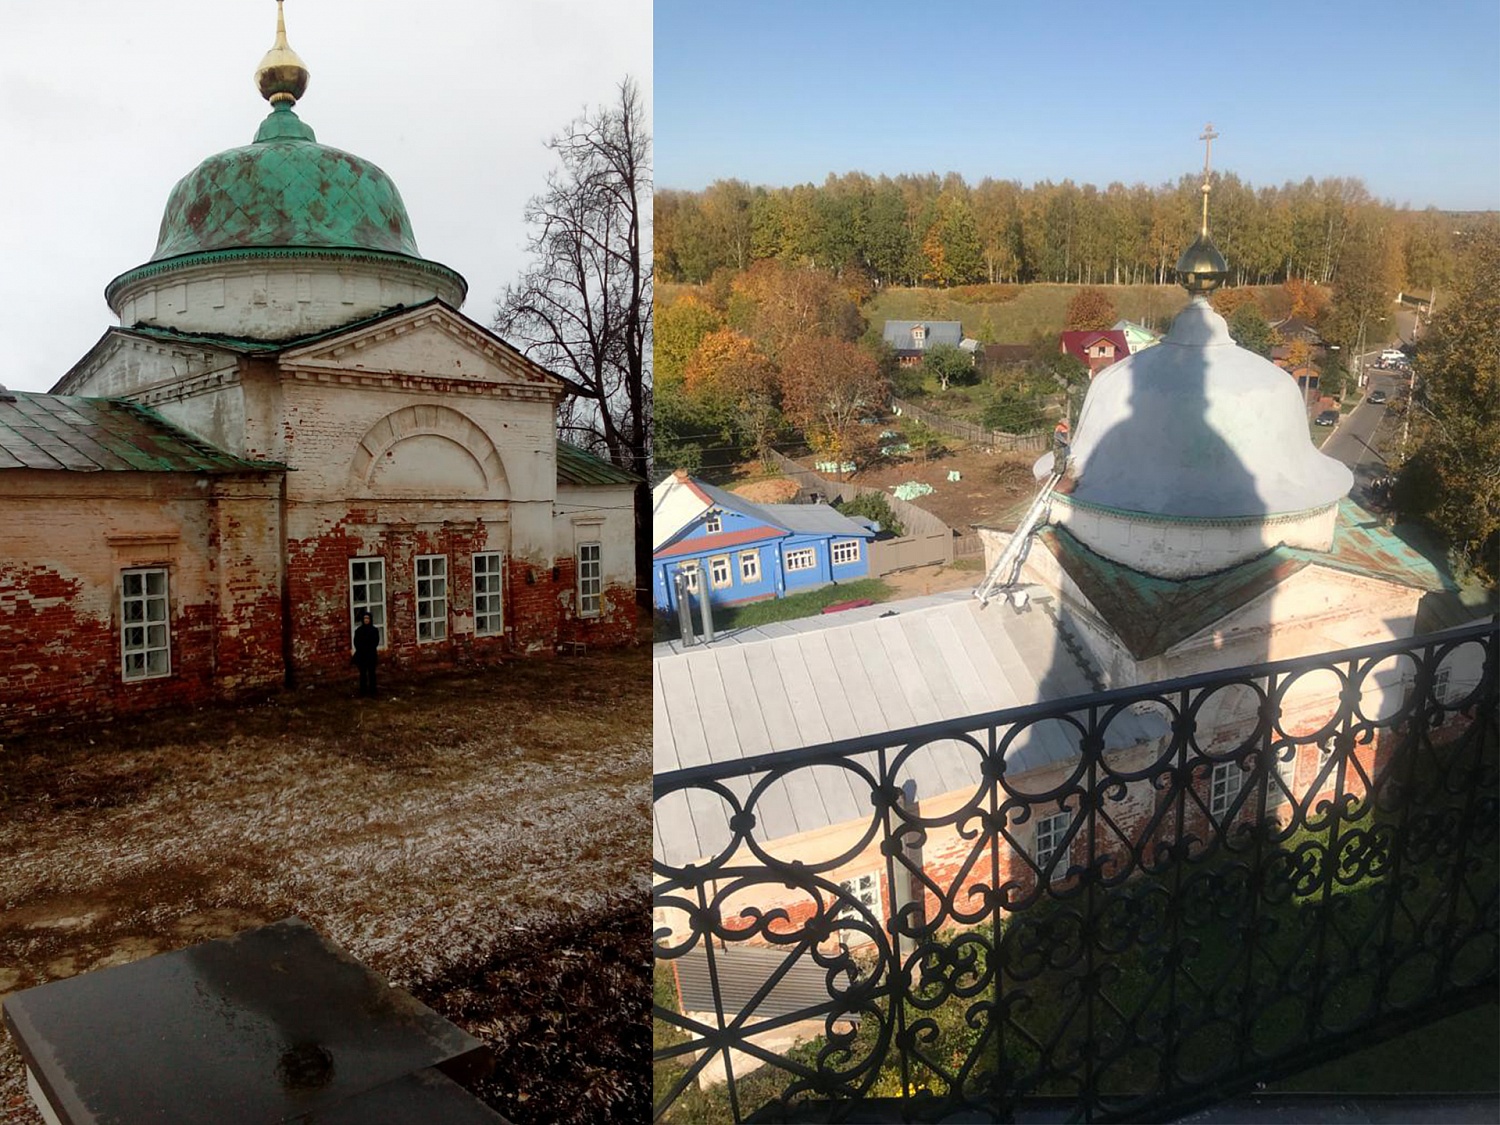 Bronya Metal and Bronya Aquablok on the roof of the Church Introduction to the Temple of the Most Holy Theotokos. Plyos town, Ivanovo region (photo)